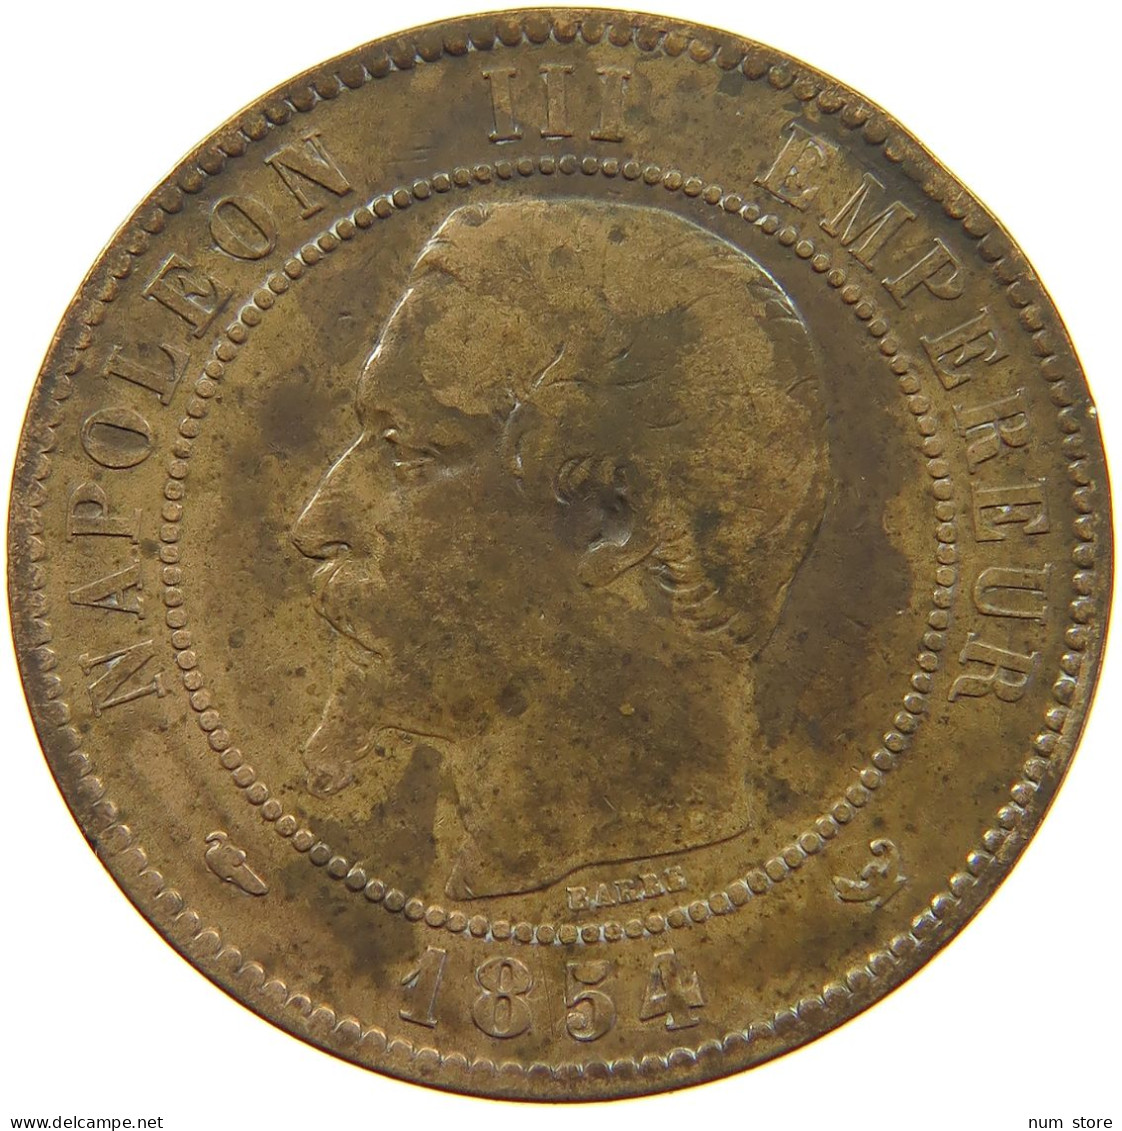 FRANCE 10 CENTIMES 1854 W #a059 0339 - 10 Centimes